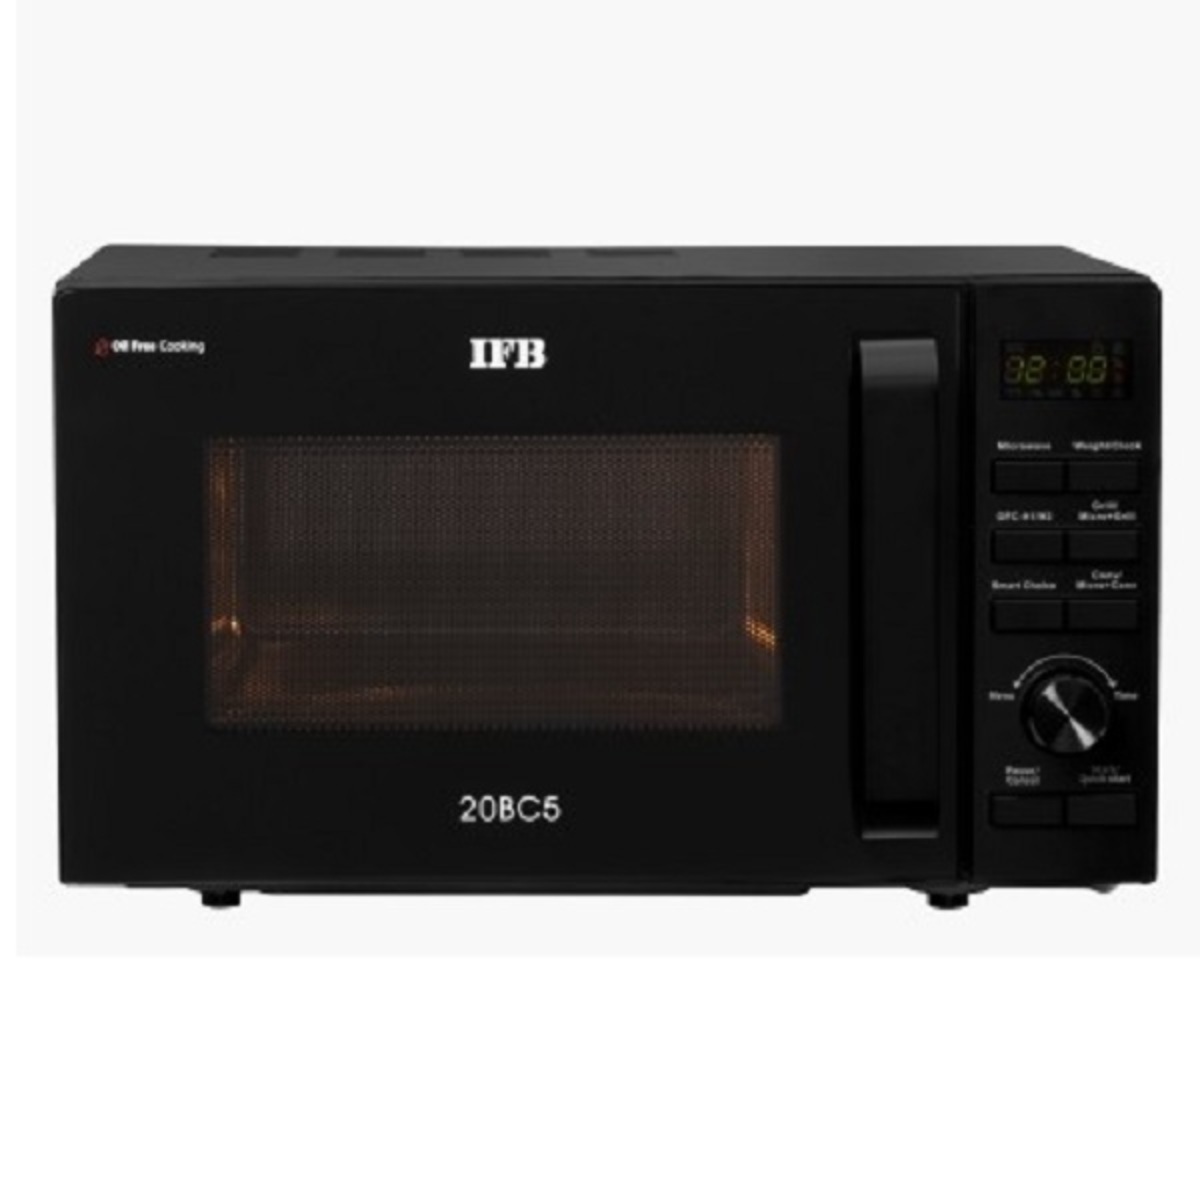 IFB Microwave Oven  20BC5 20Ltr